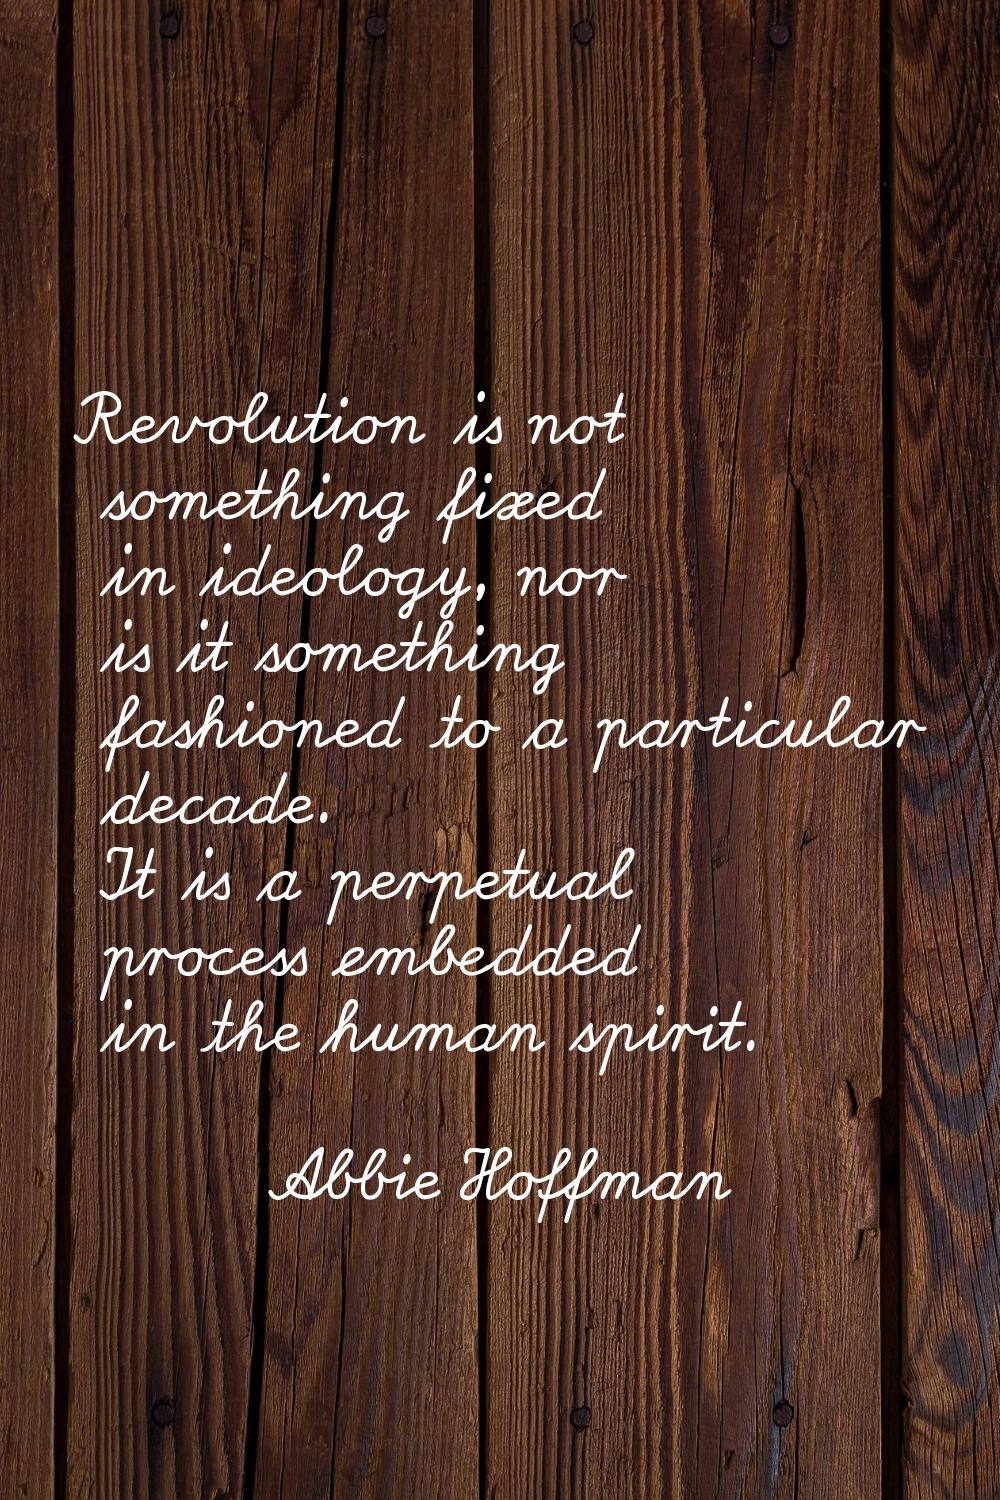 Revolution is not something fixed in ideology, nor is it something fashioned to a particular decade